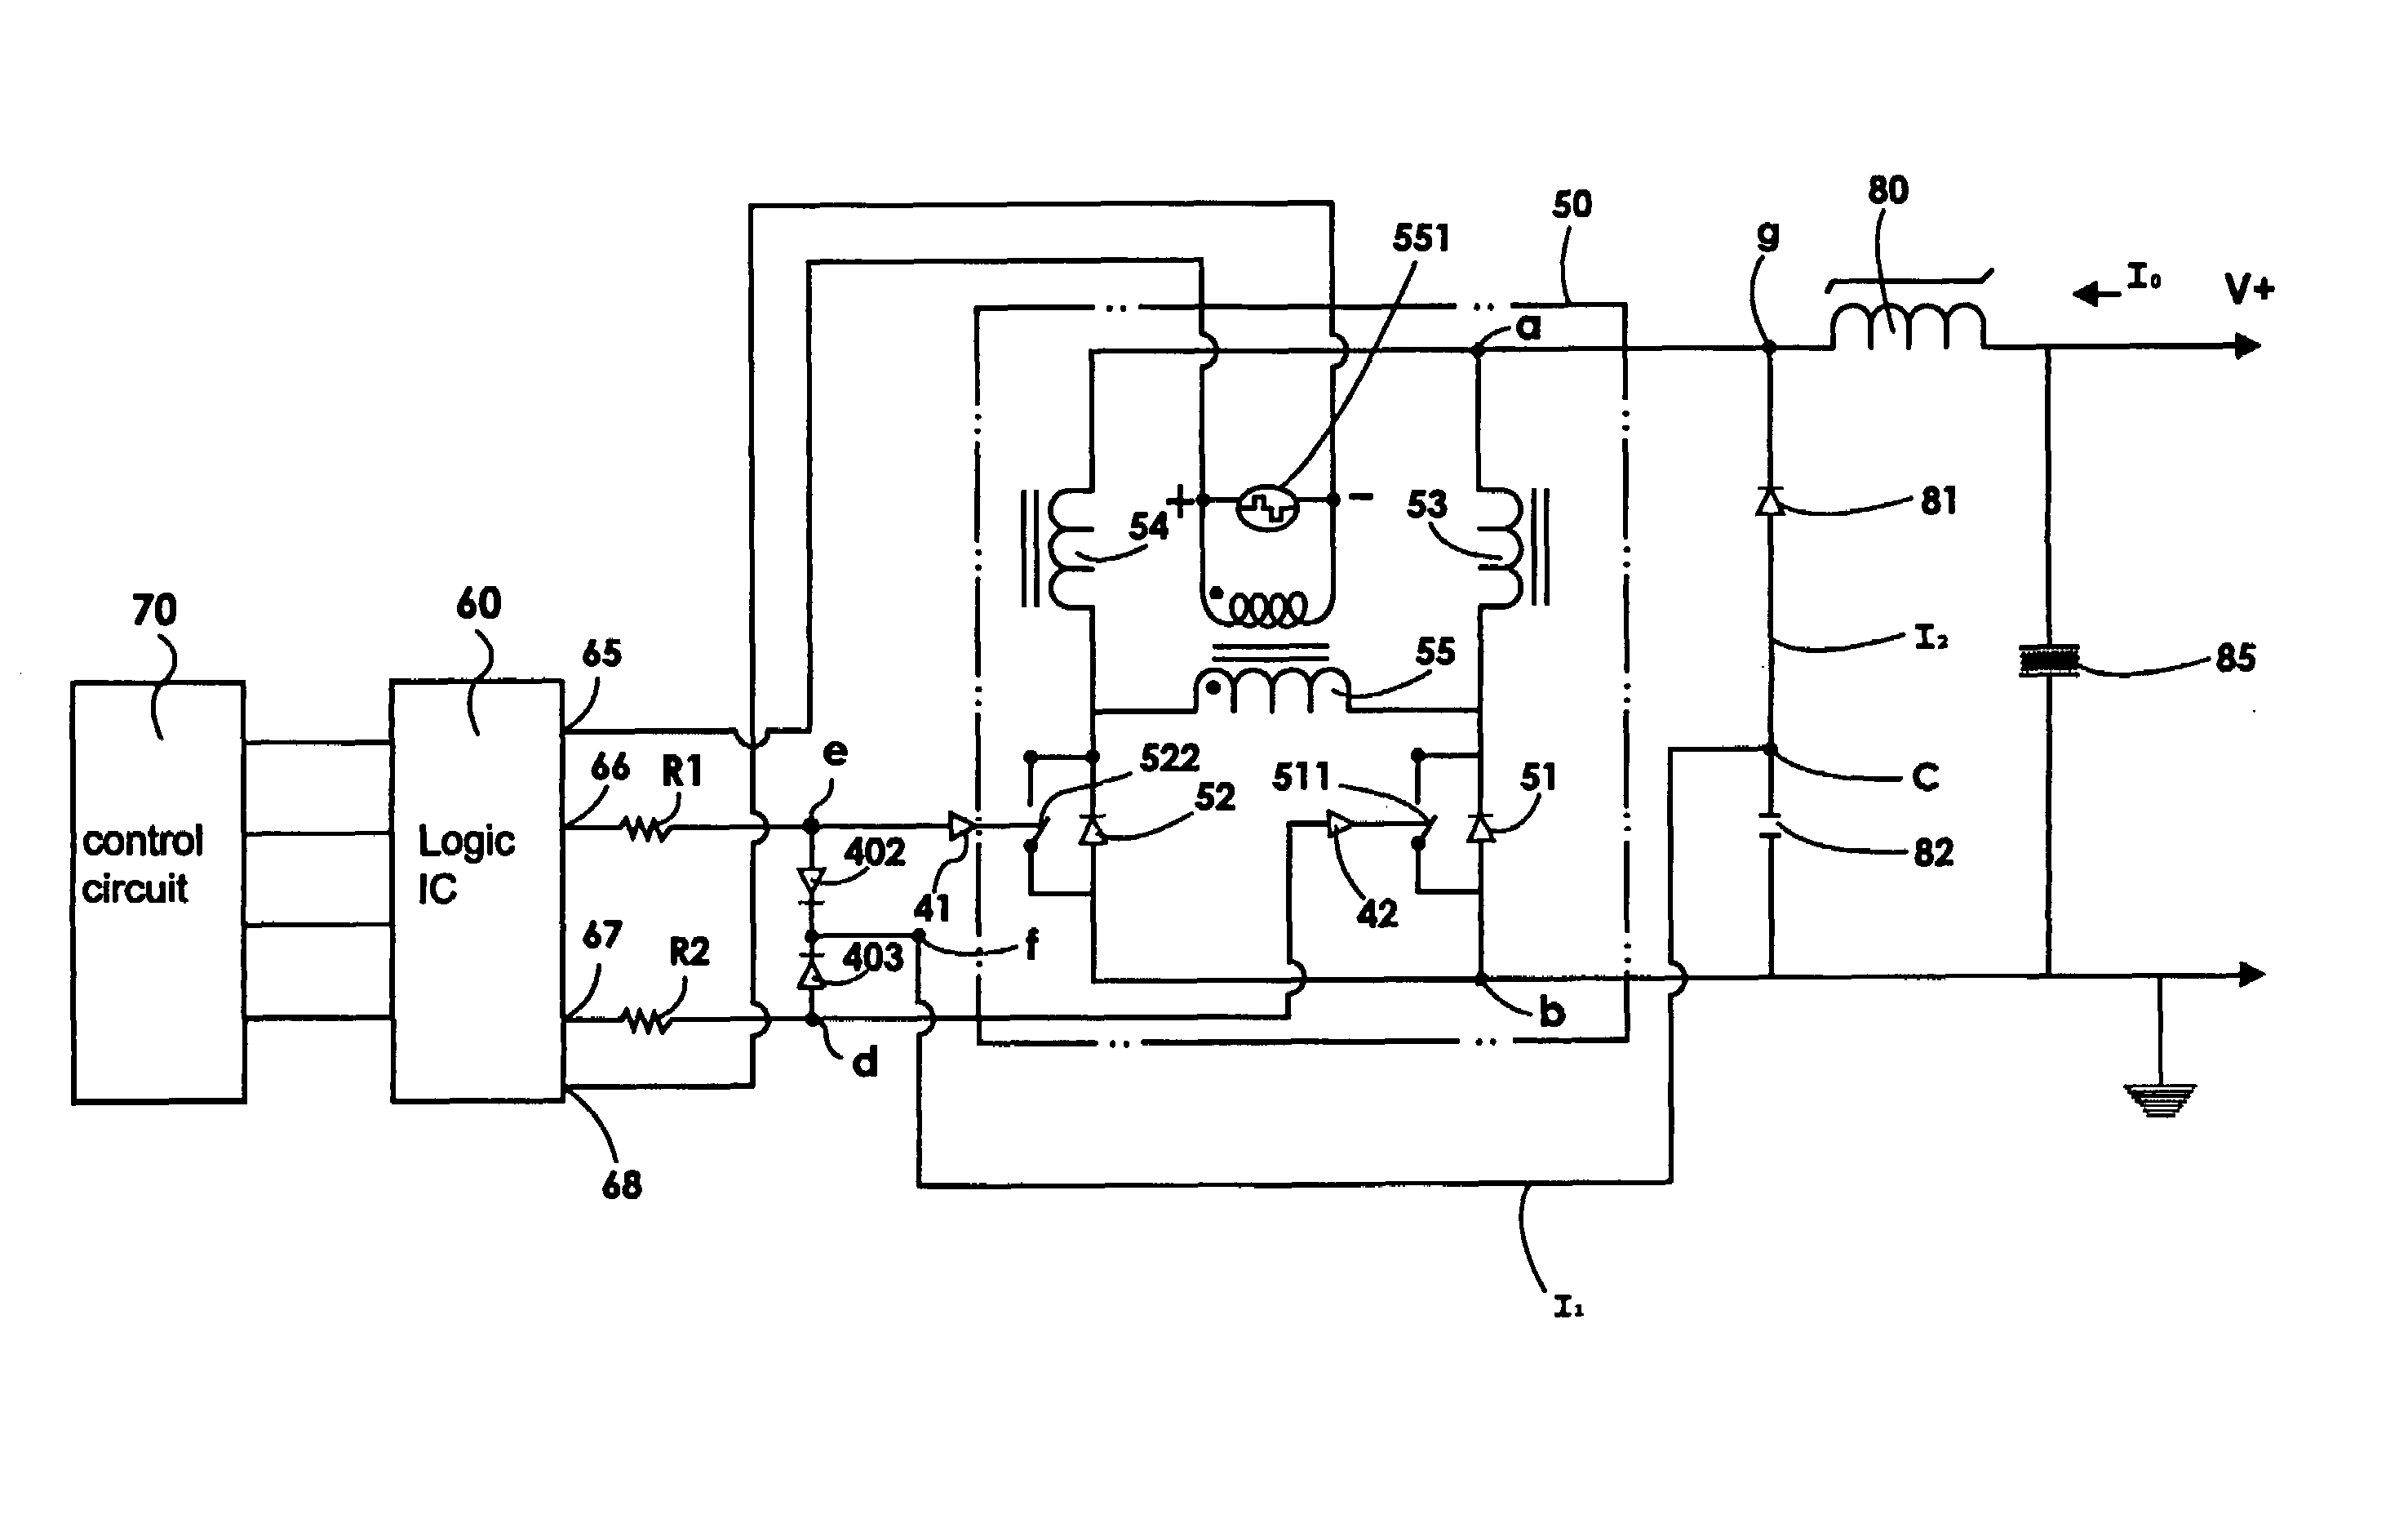 Synchronized rectifier filter control device for protecting a power supply from reverse current